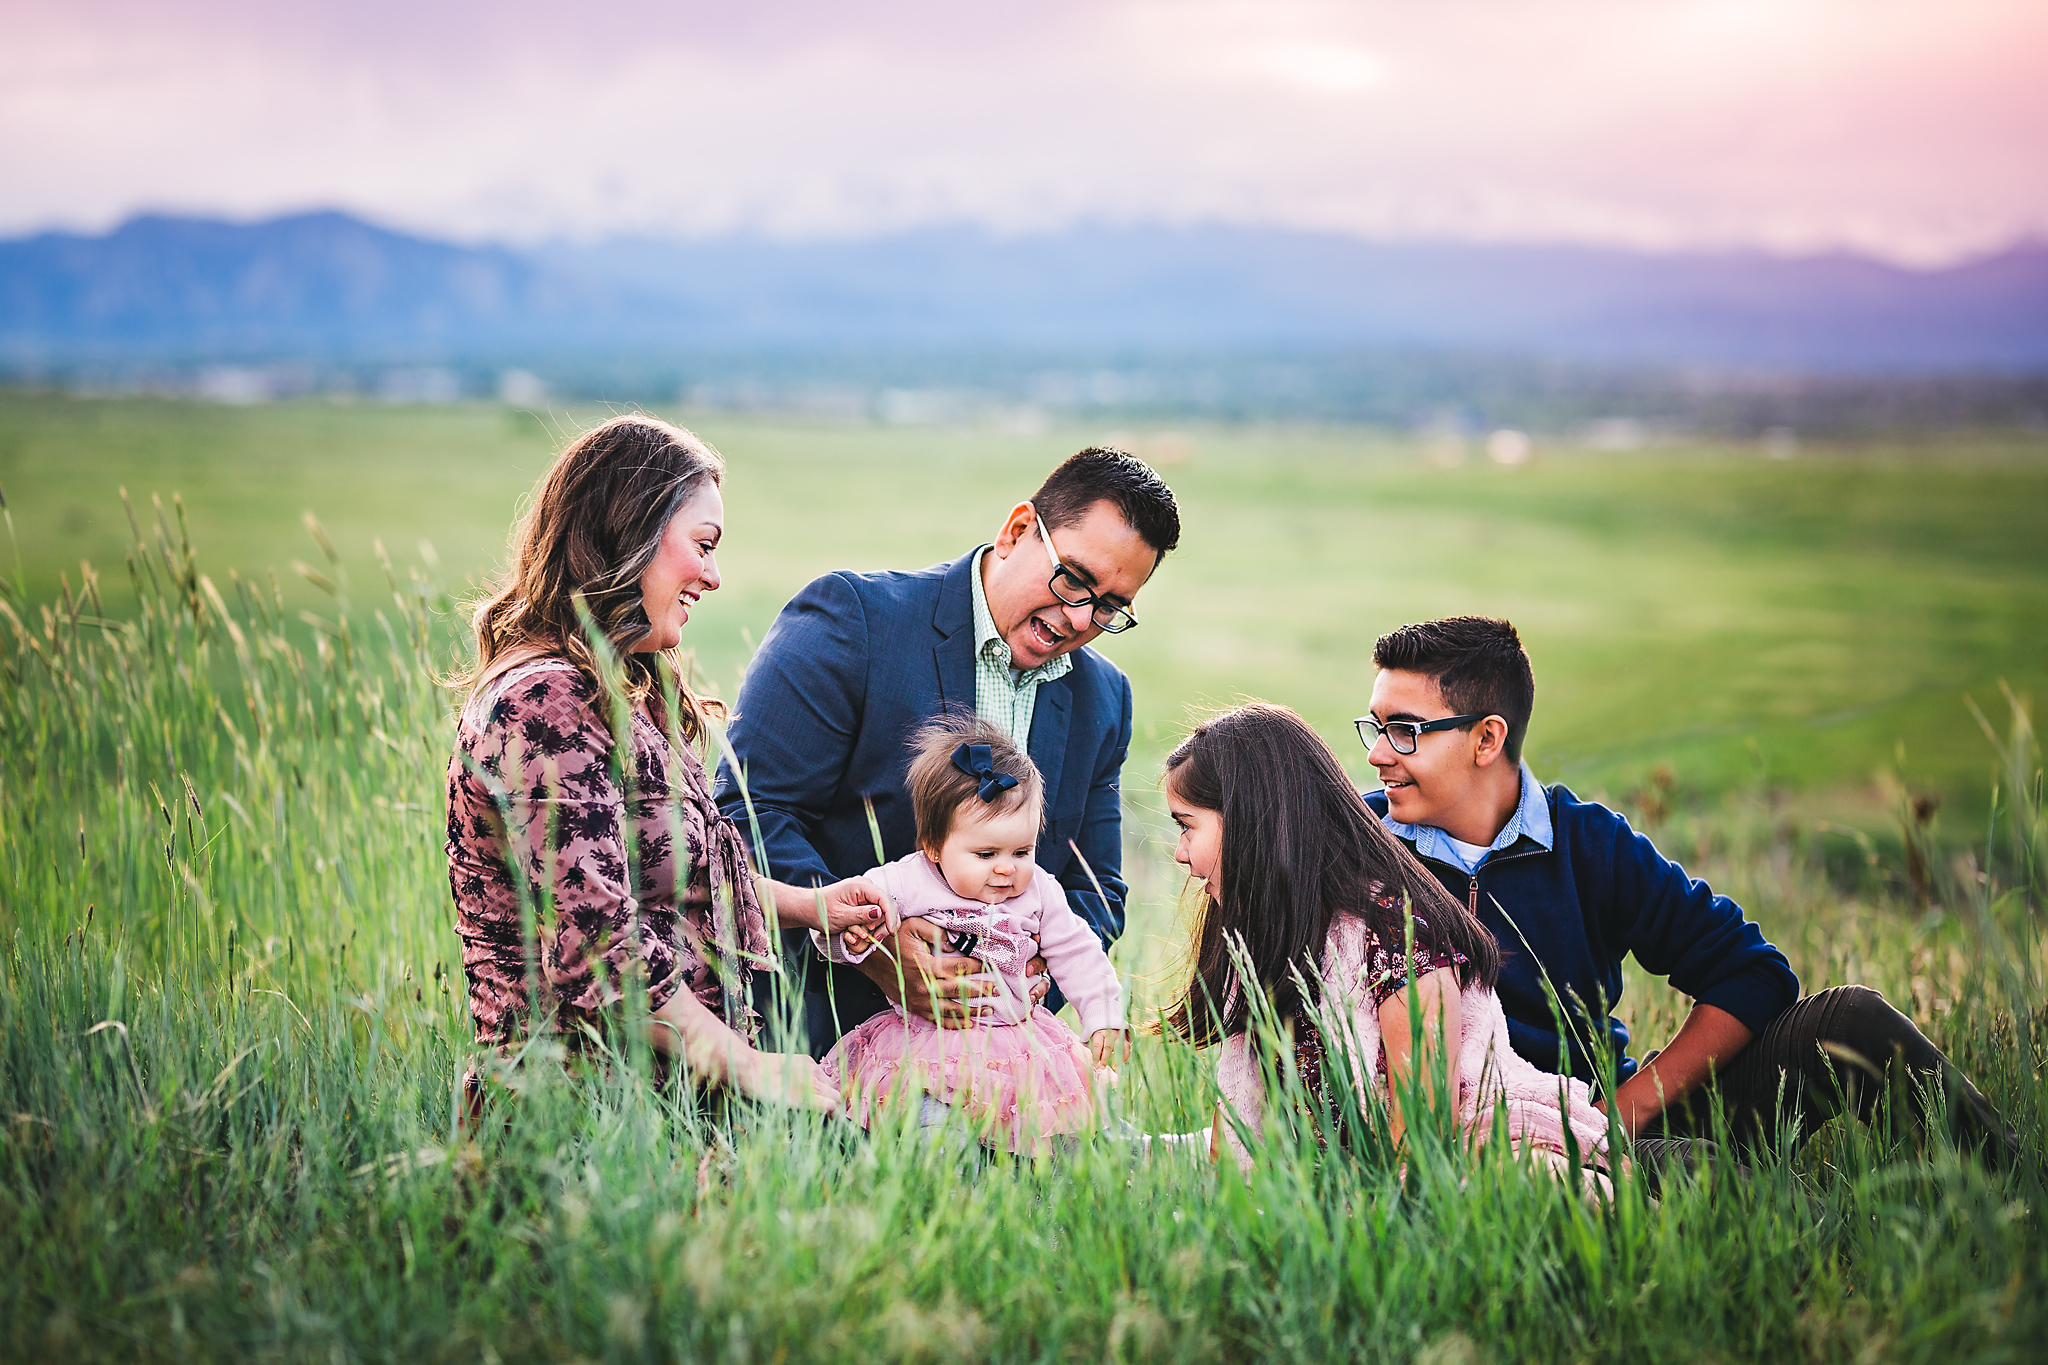 Now, Jose Salas and his wife, Shannon, have three children who celebrate their Mexican heritage side-by-side with their American culture. Photo credit: Kim Le Brown Creative